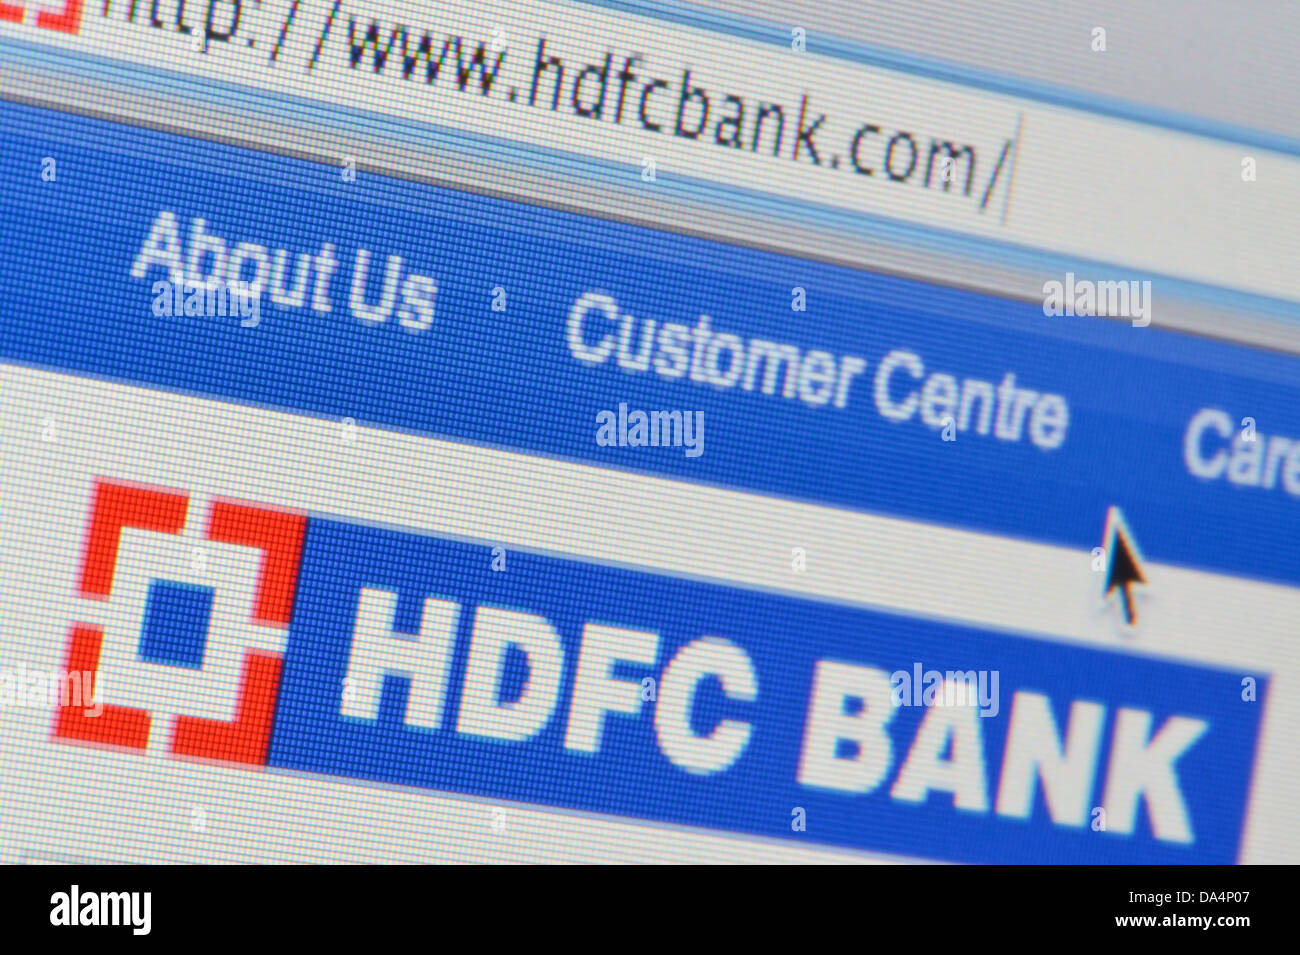 Hdfc Bank Cheque Background : Bank of America logo Free vector in Adobe Illustrator ai ...